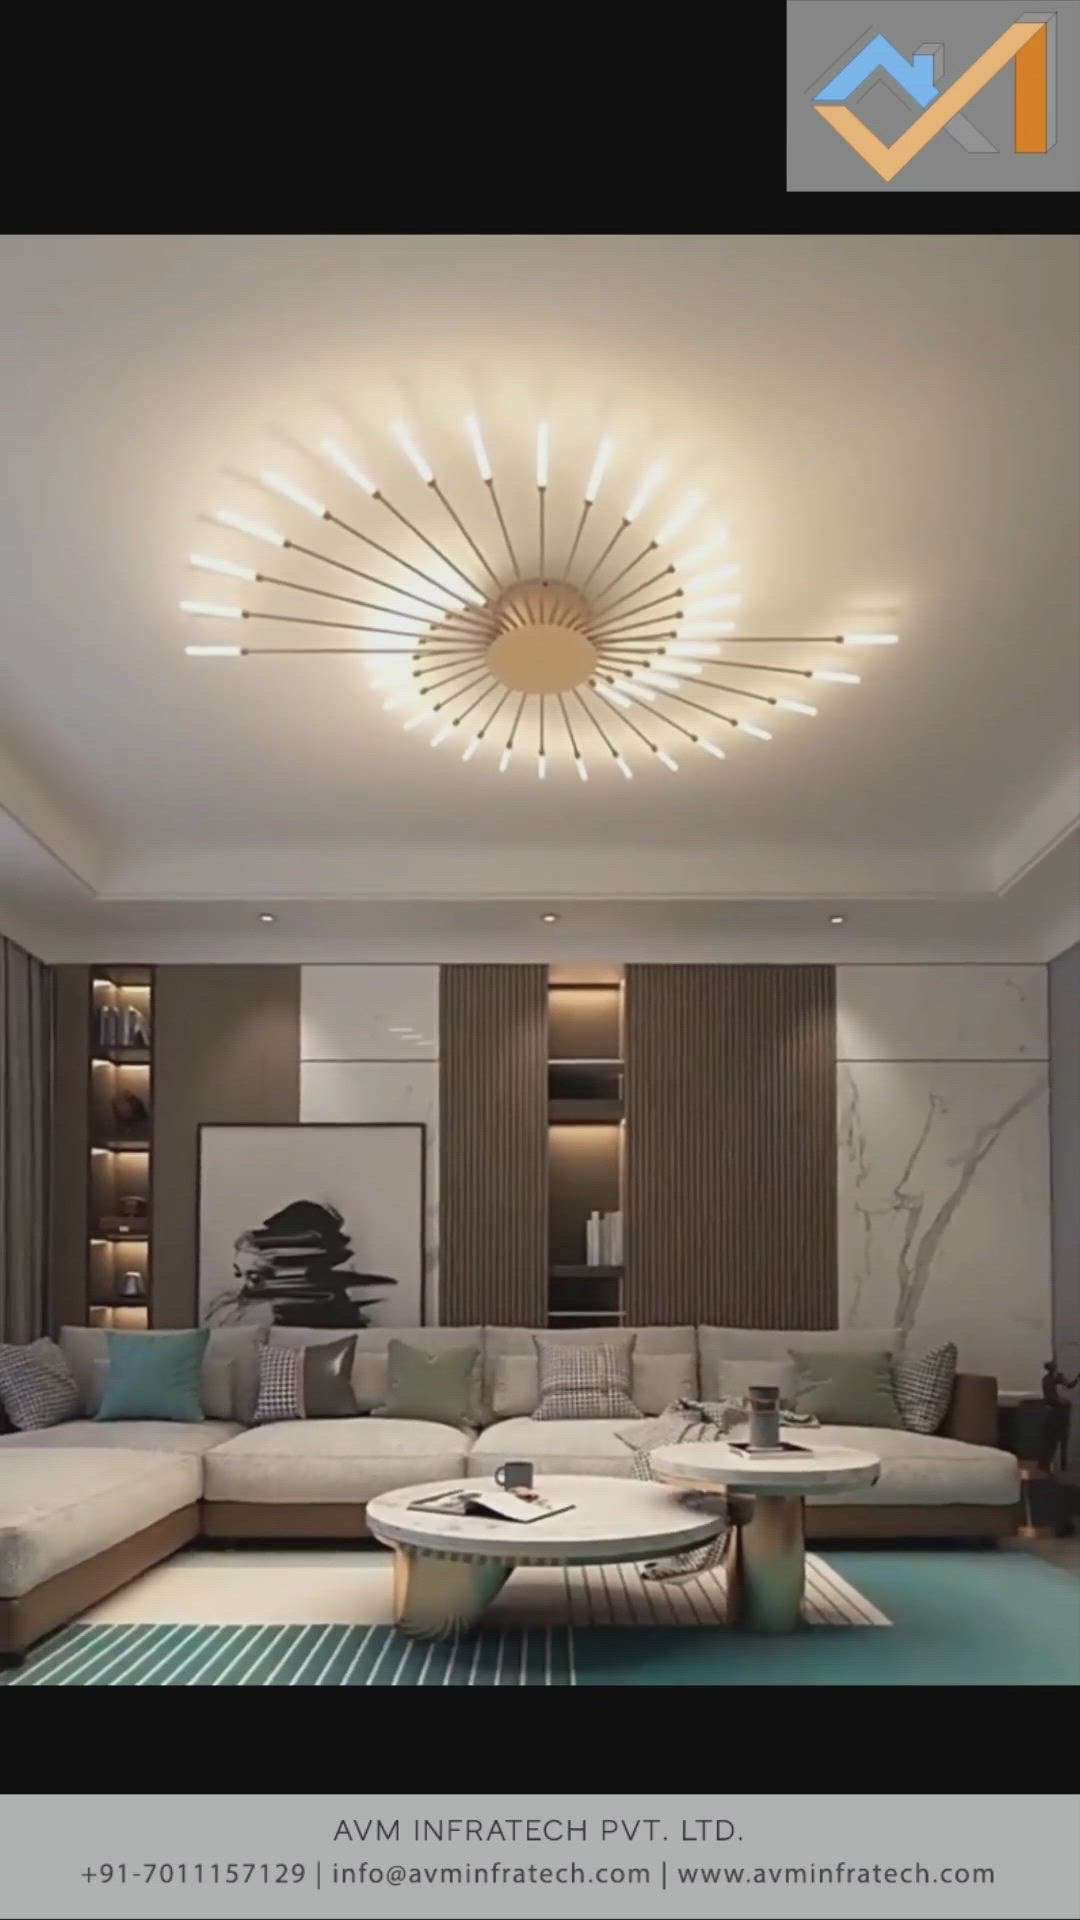 Luxury interior design is about creating a high-end lifestyle for yourself and your loved ones. It’s more than aesthetics. It’s about creating the perfect environment to enjoy life to its fullest.


Follow us for more such amazing updates. 
.
.
#luxury #luxurylife #architect #architecture #interior #interiordesign #rooms #architectural #livingroom #luxurious #client #interiordesigner #wooden #theme #lighting #pastel #subtle #house #bedroom